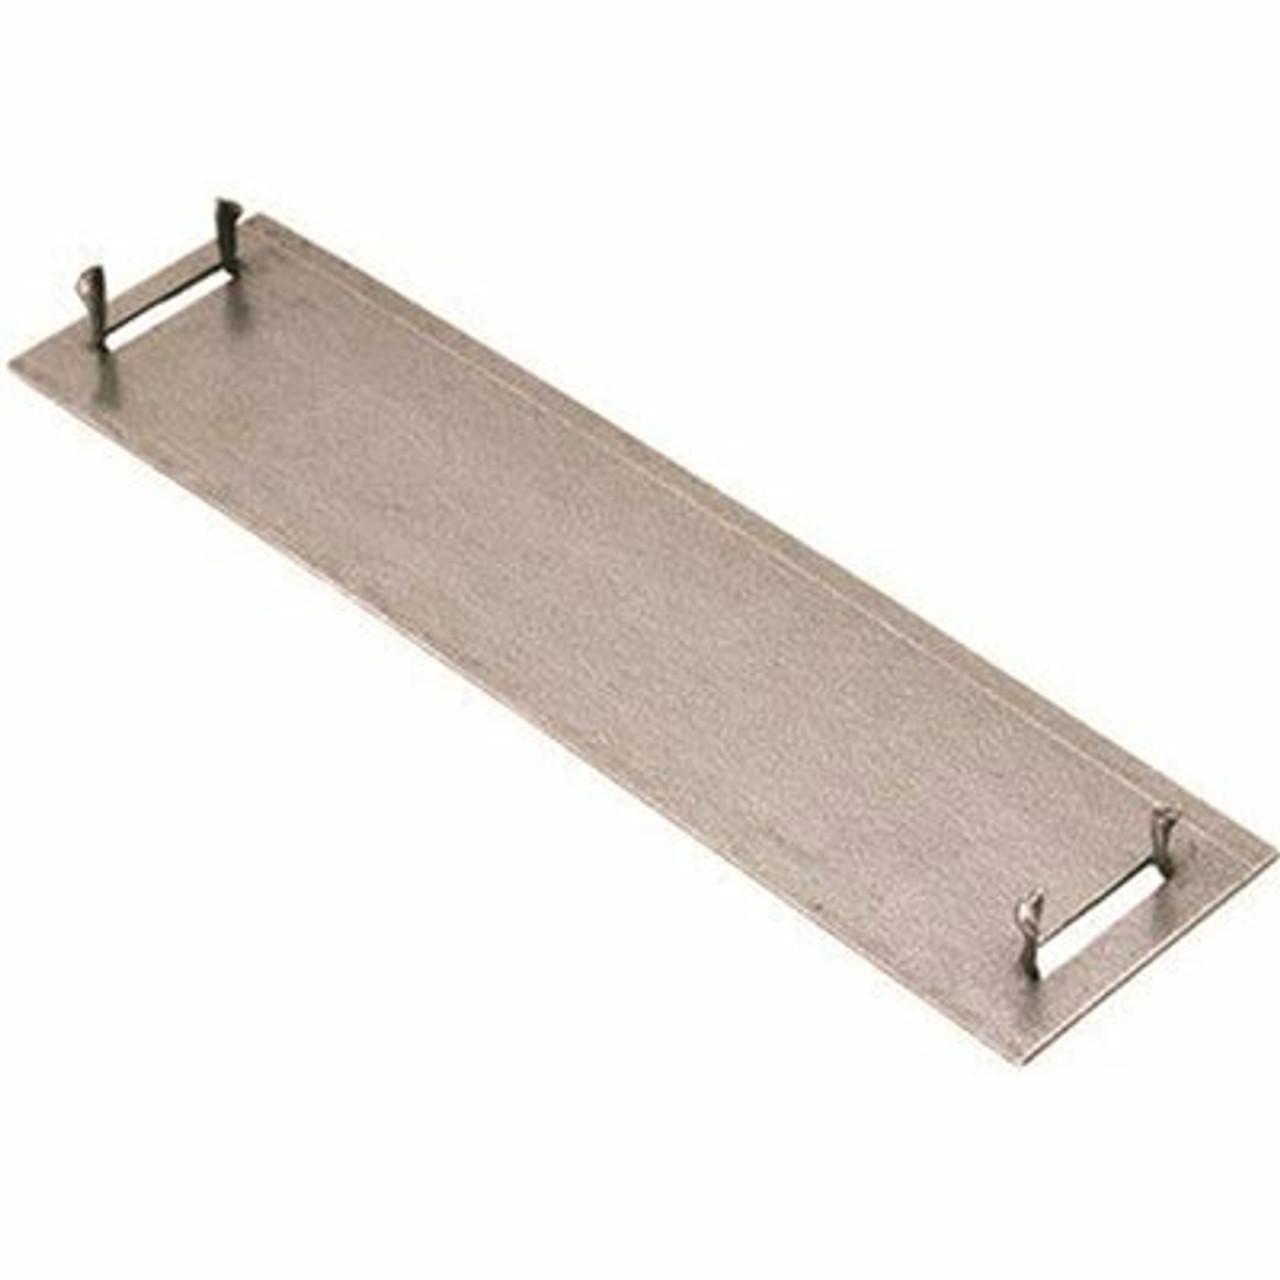 Greenfield 1-1/2 In. X 6 In. 20-Gauge Galvanized Stud Guard (100-Pack)